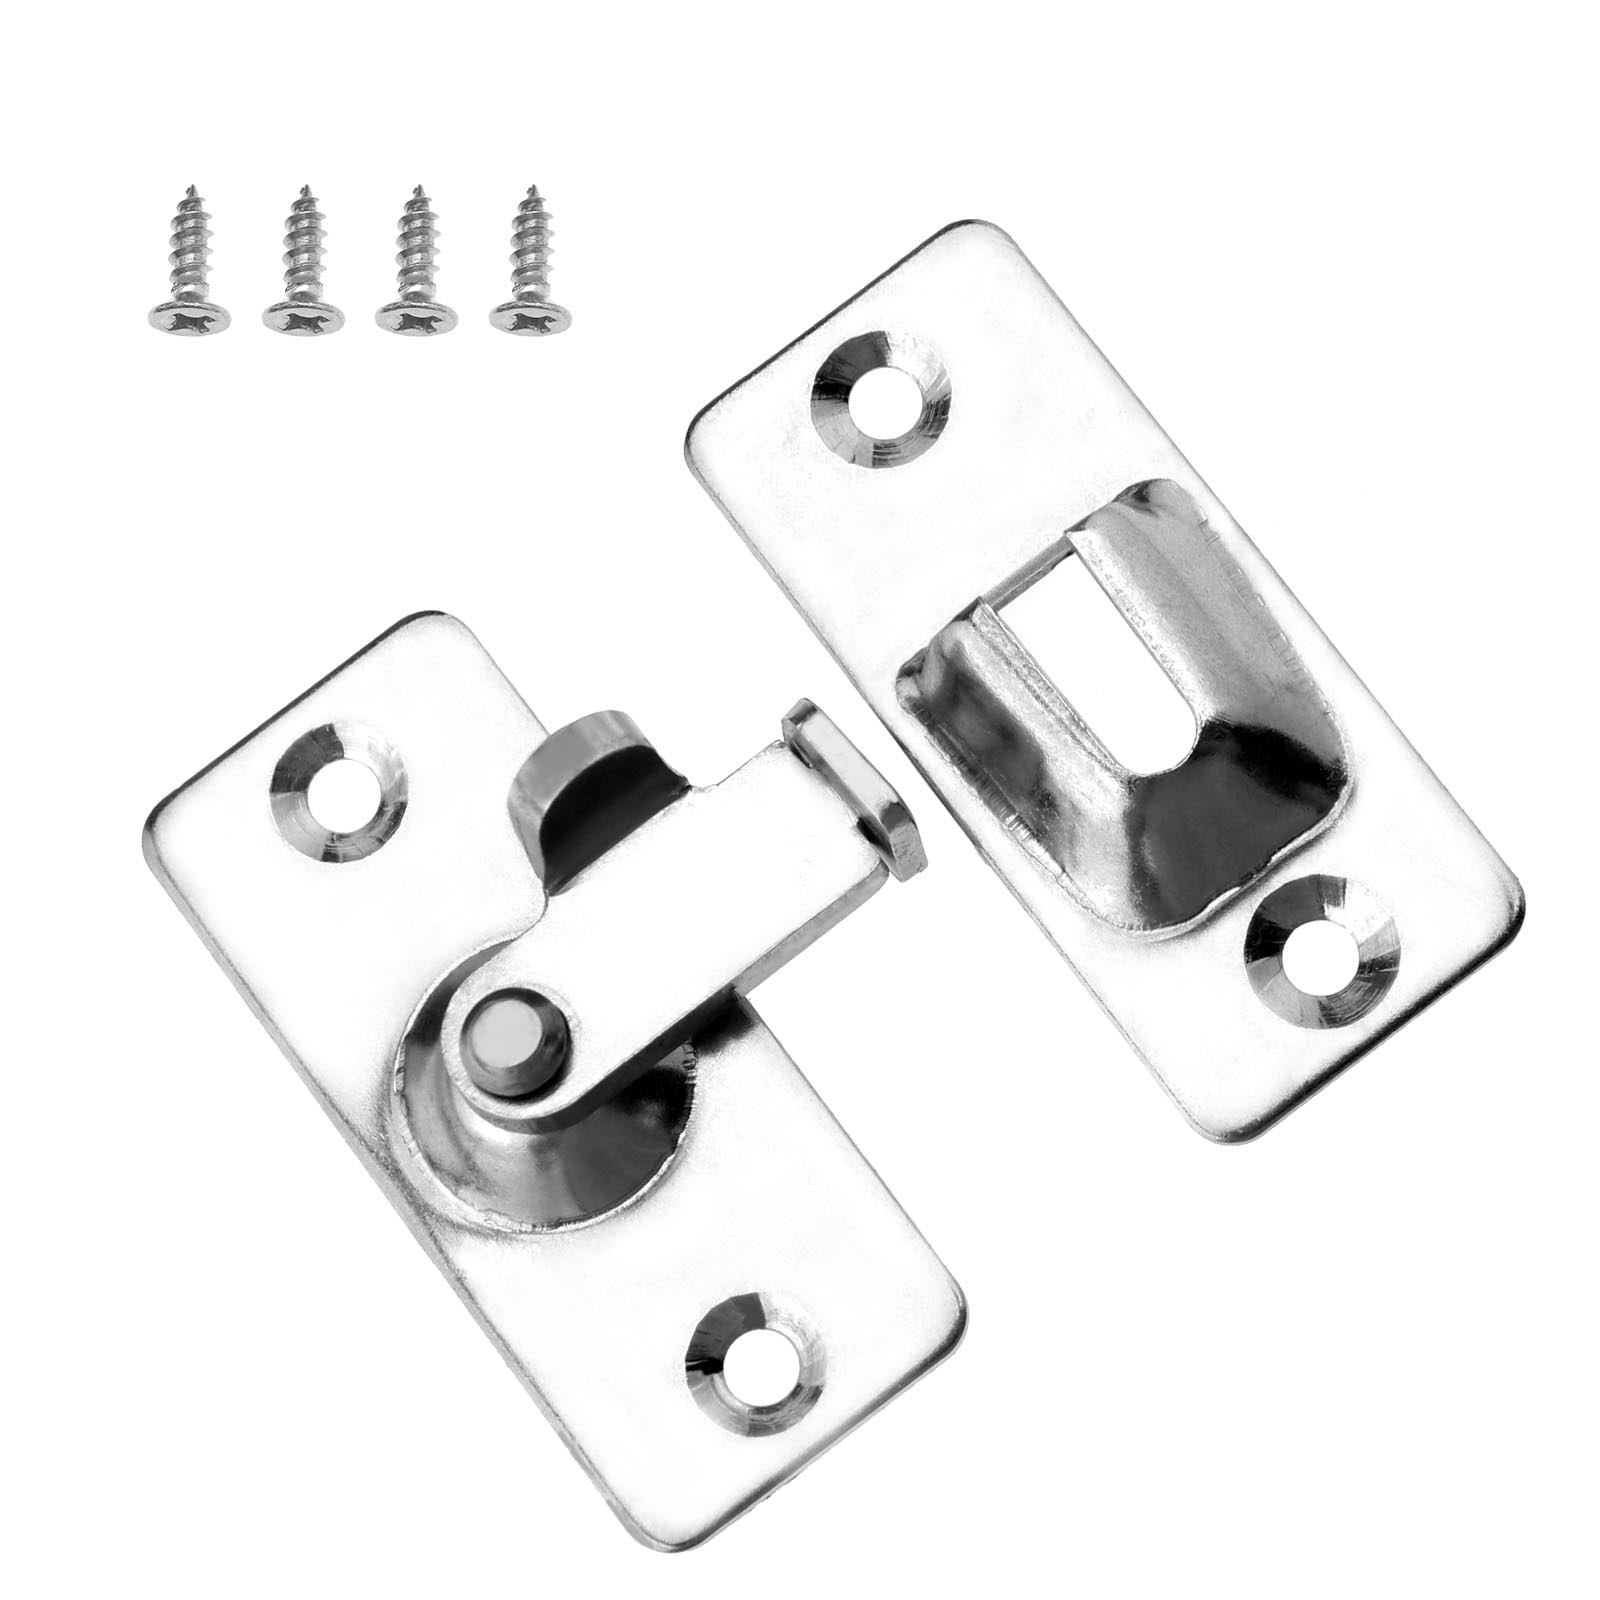 90 Degree Right Angle Hasp Latch Sliding Lock Bolt with 4 Screws for ...